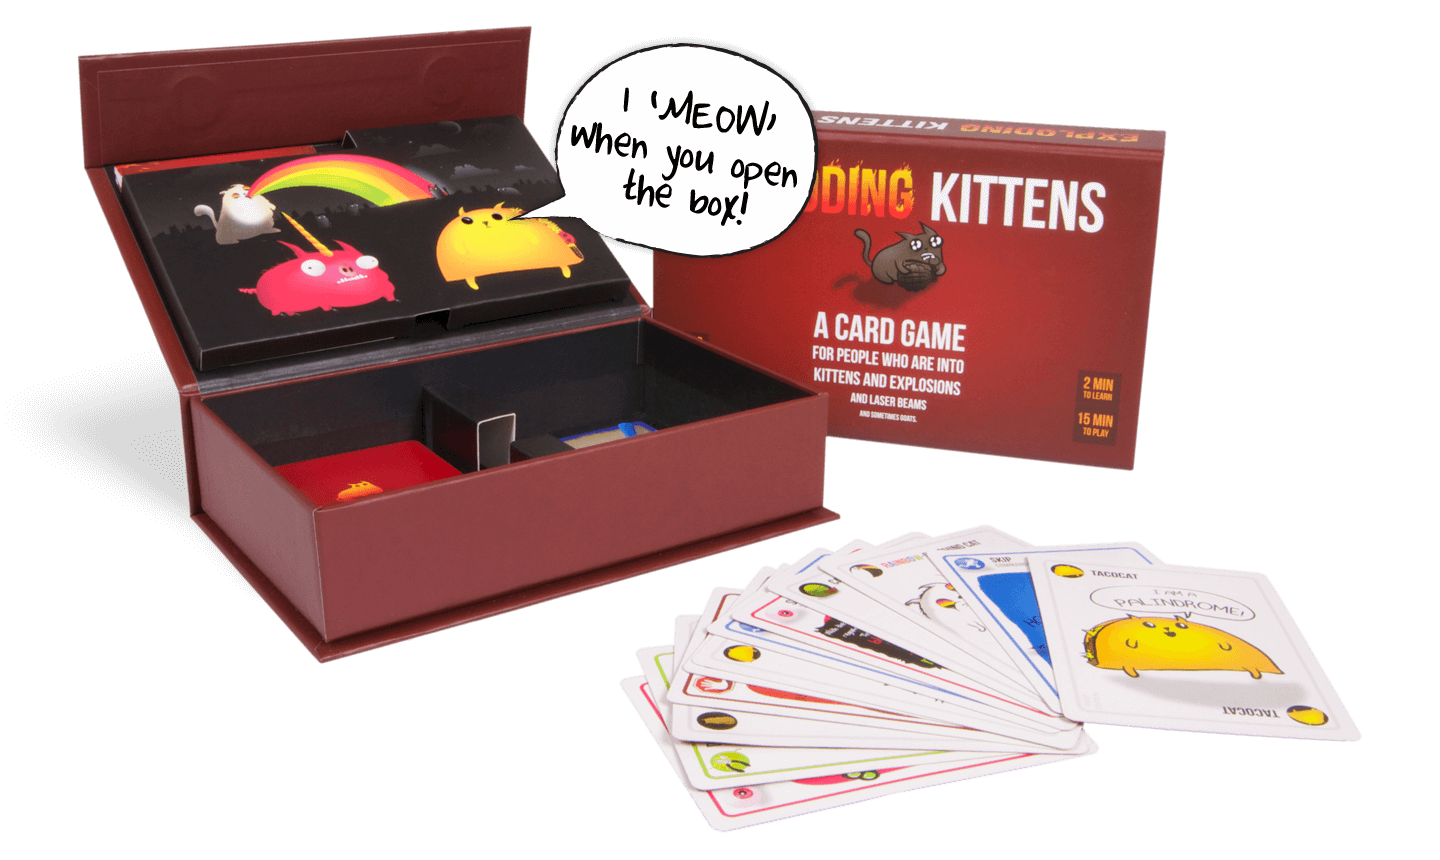 Exploding Kittens 1st Edition (Limited) | The CG Realm